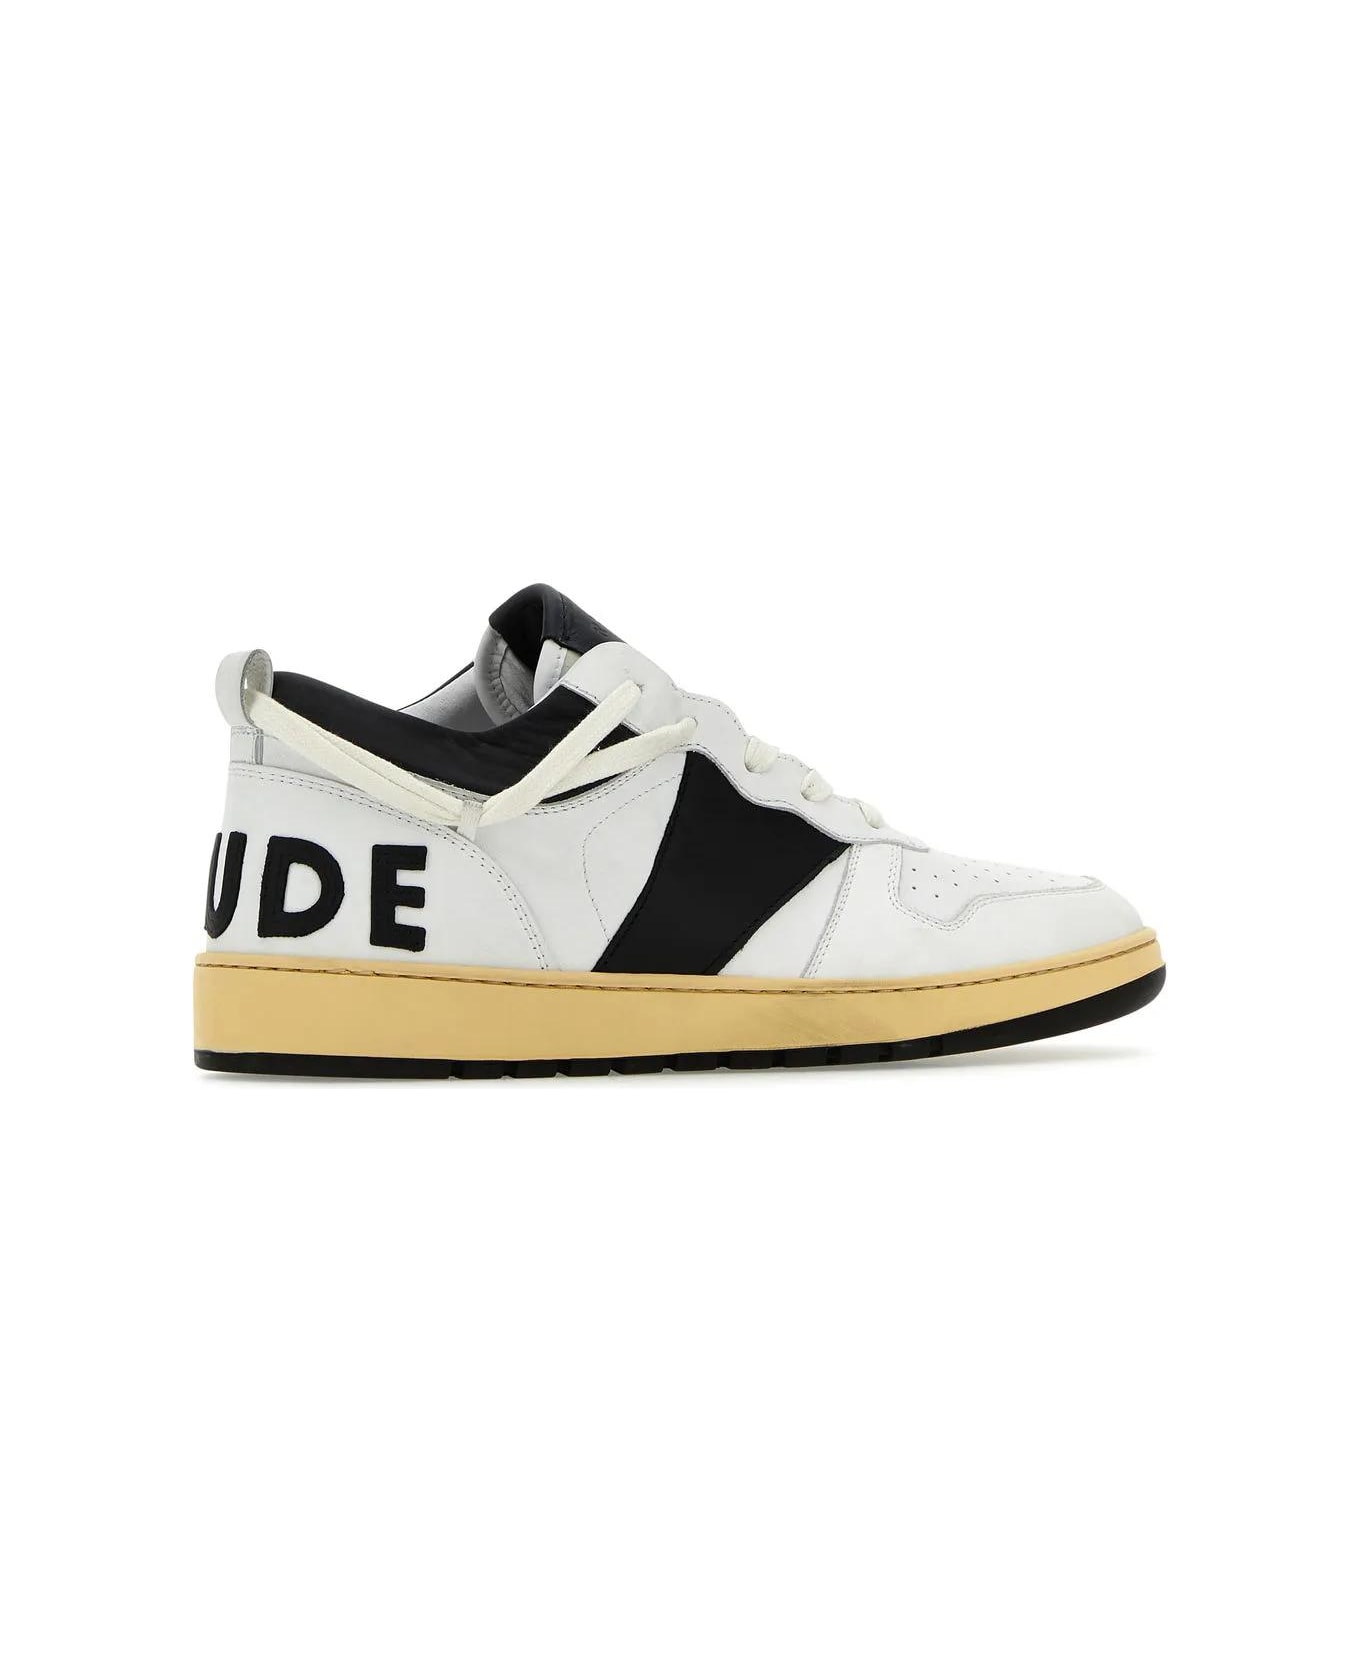 Rhude Two-tone Leather Rhecess Sneakers - WHITE